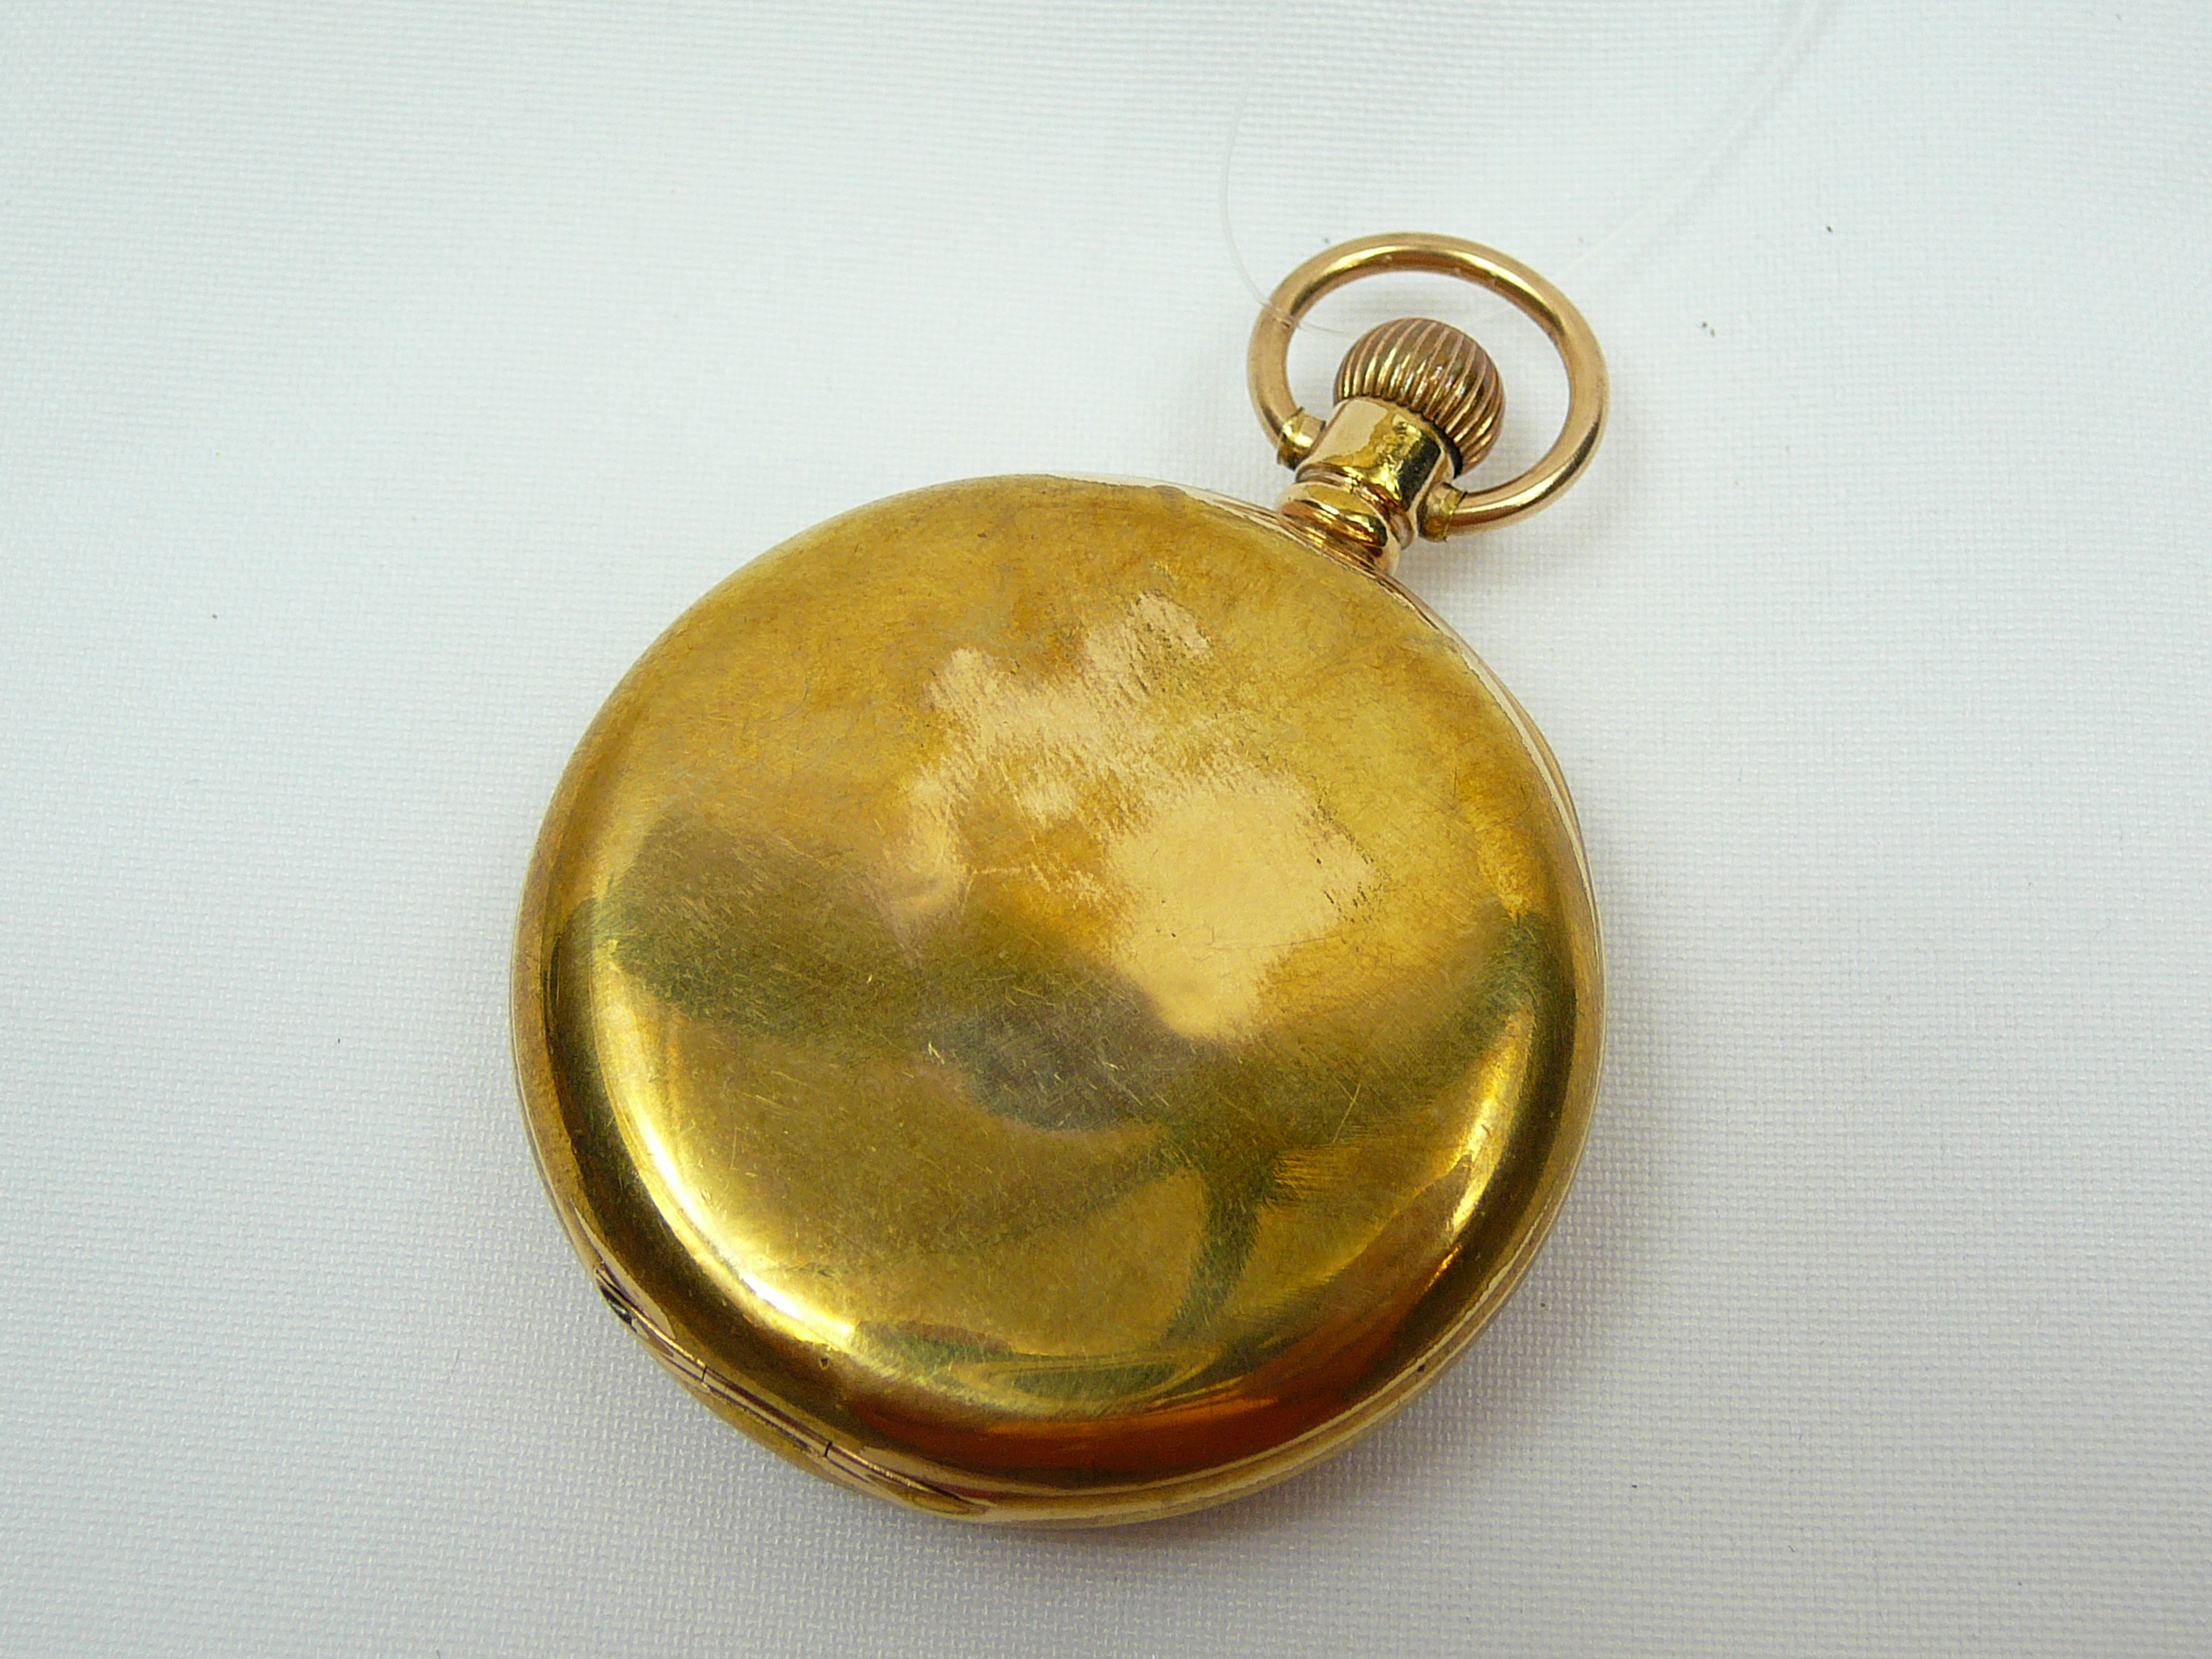 Gents Pocket Watch - Image 2 of 4